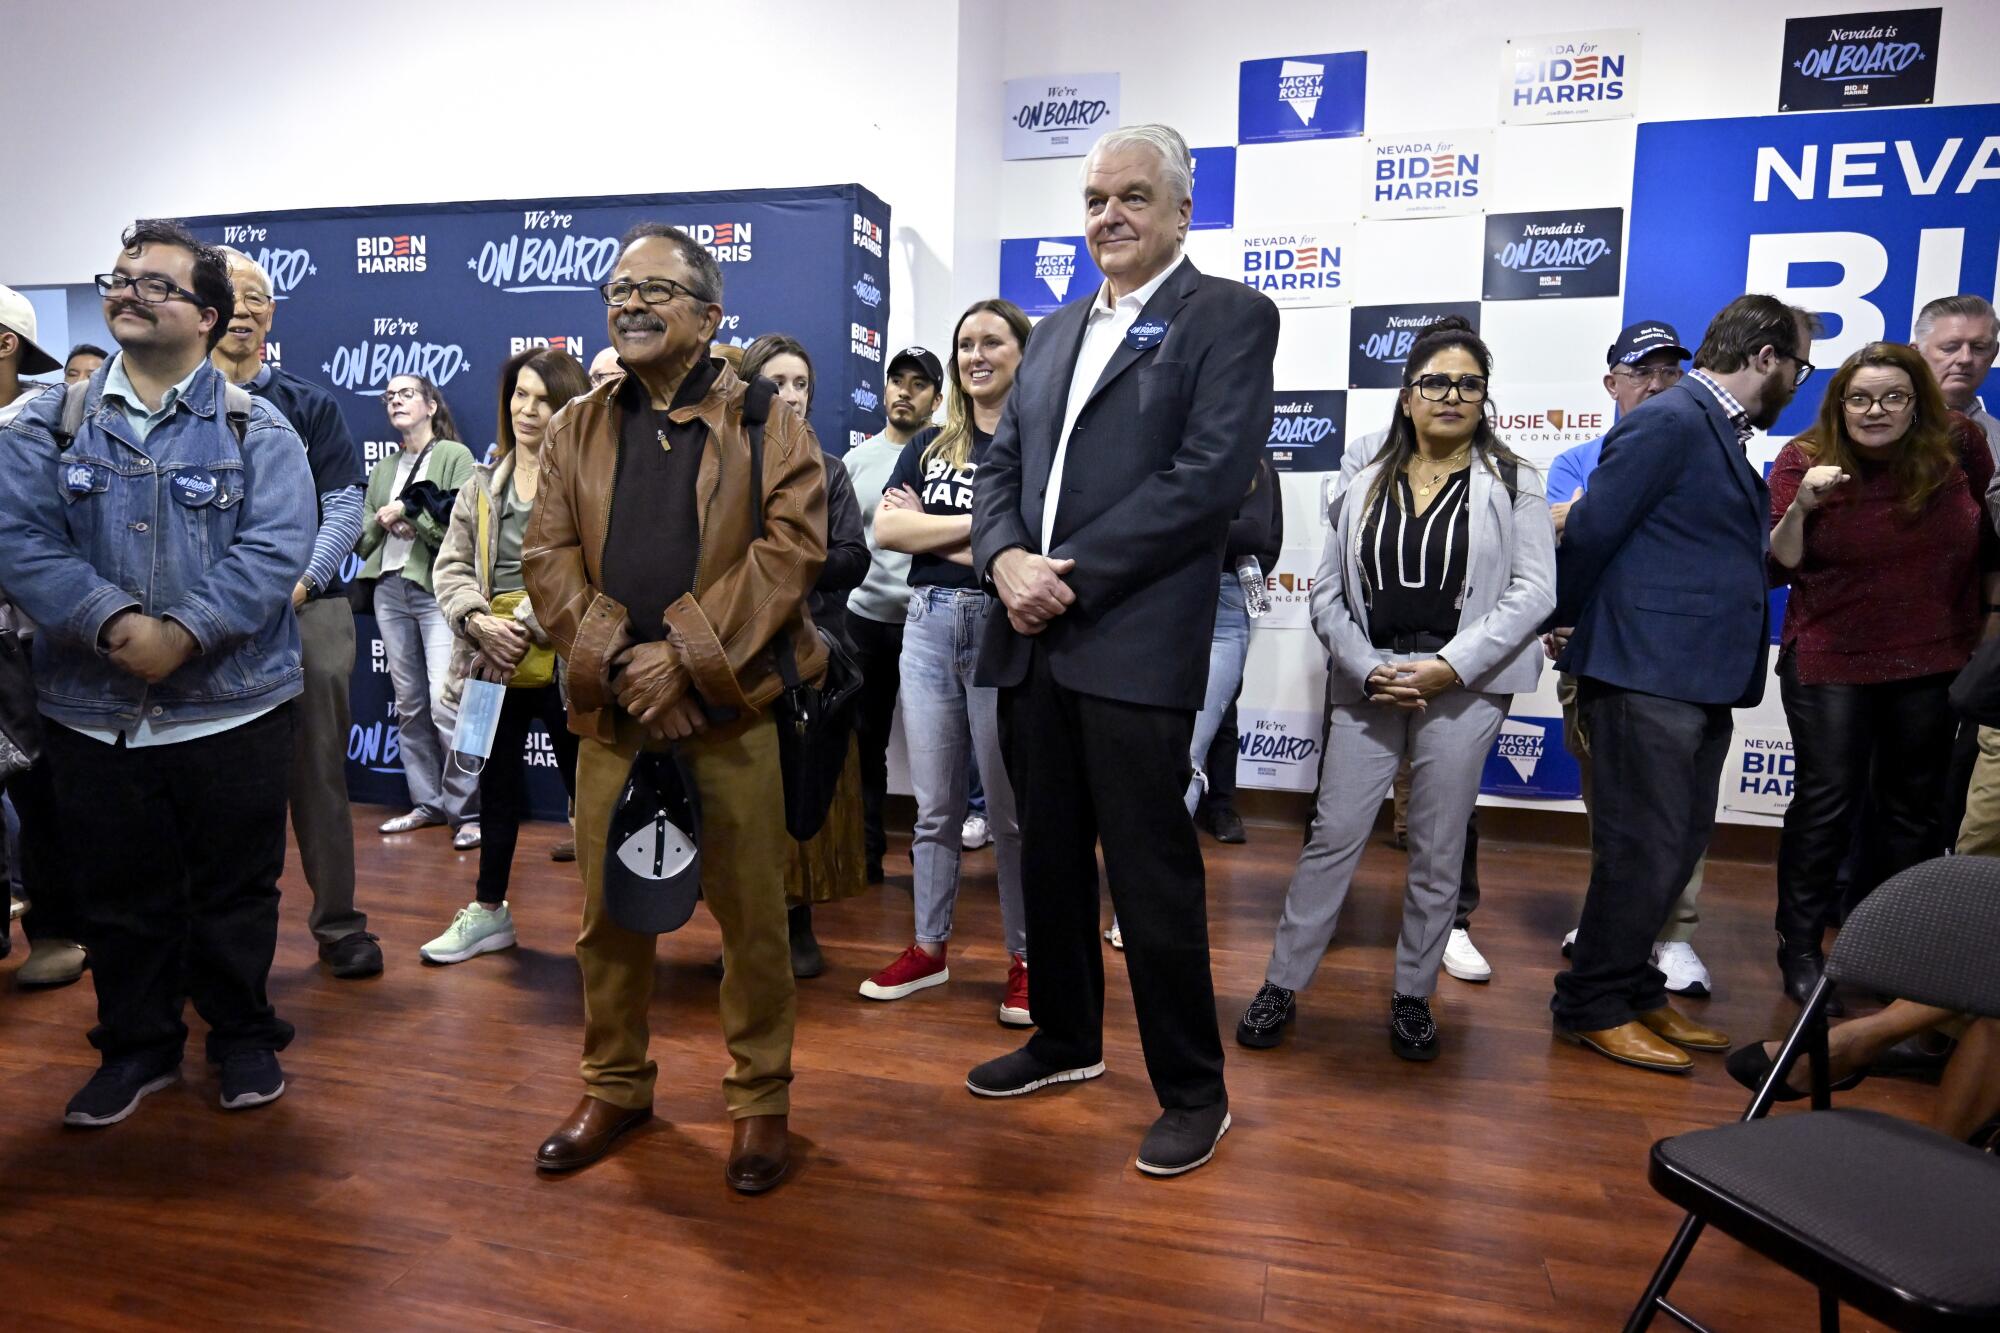 Former Nevada Gov. Steve Sisolak, center, at a newly opened Democratic campaign office in Las Vegas.